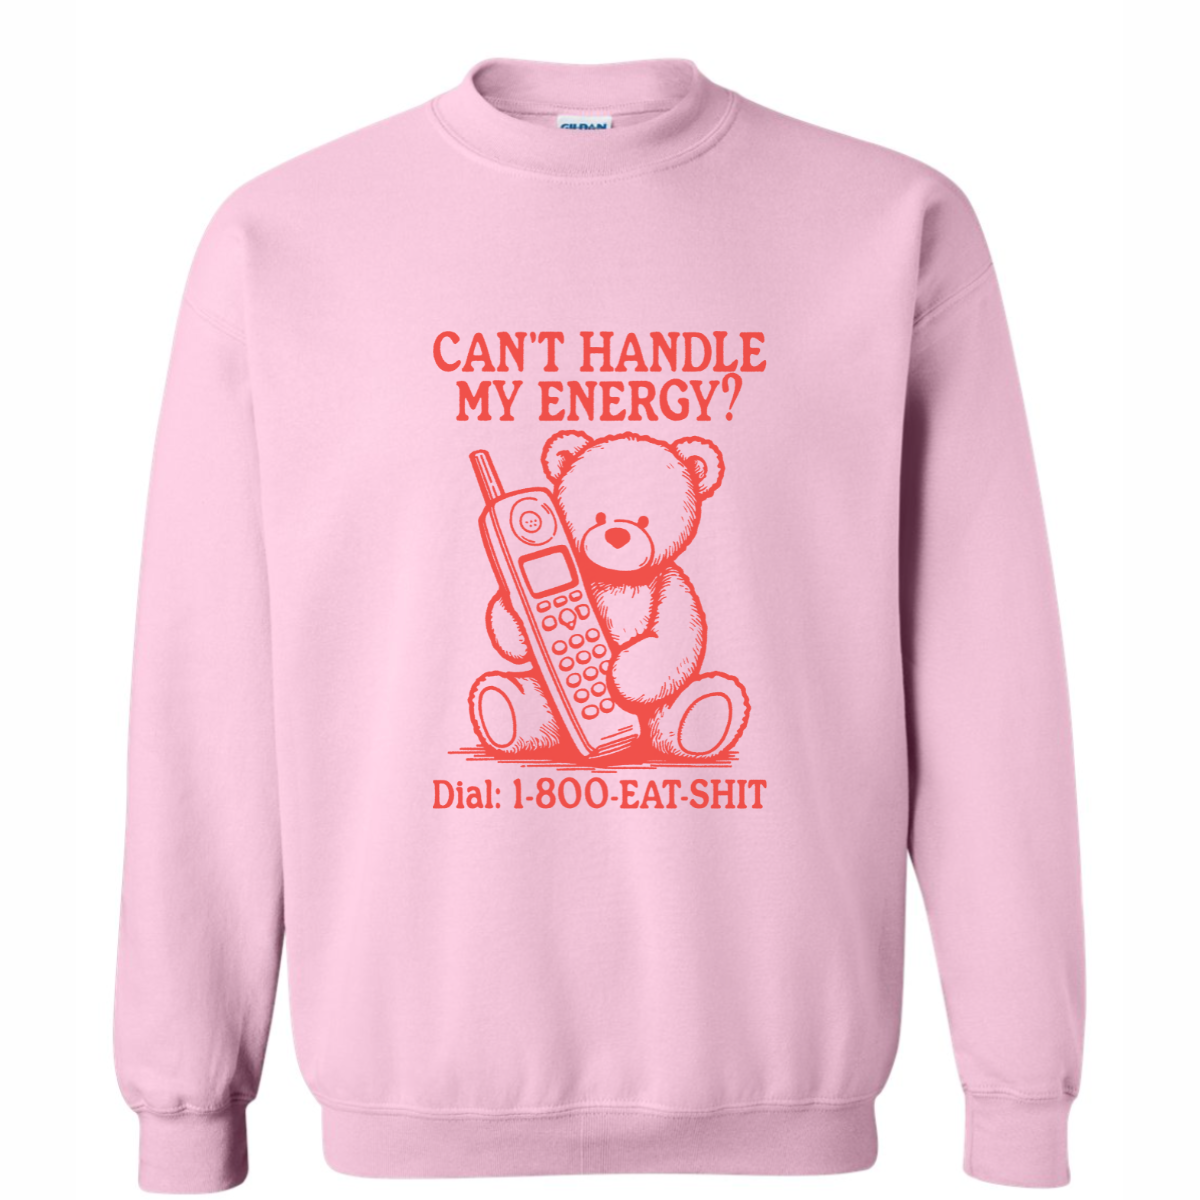 Can't Handle My Energy?